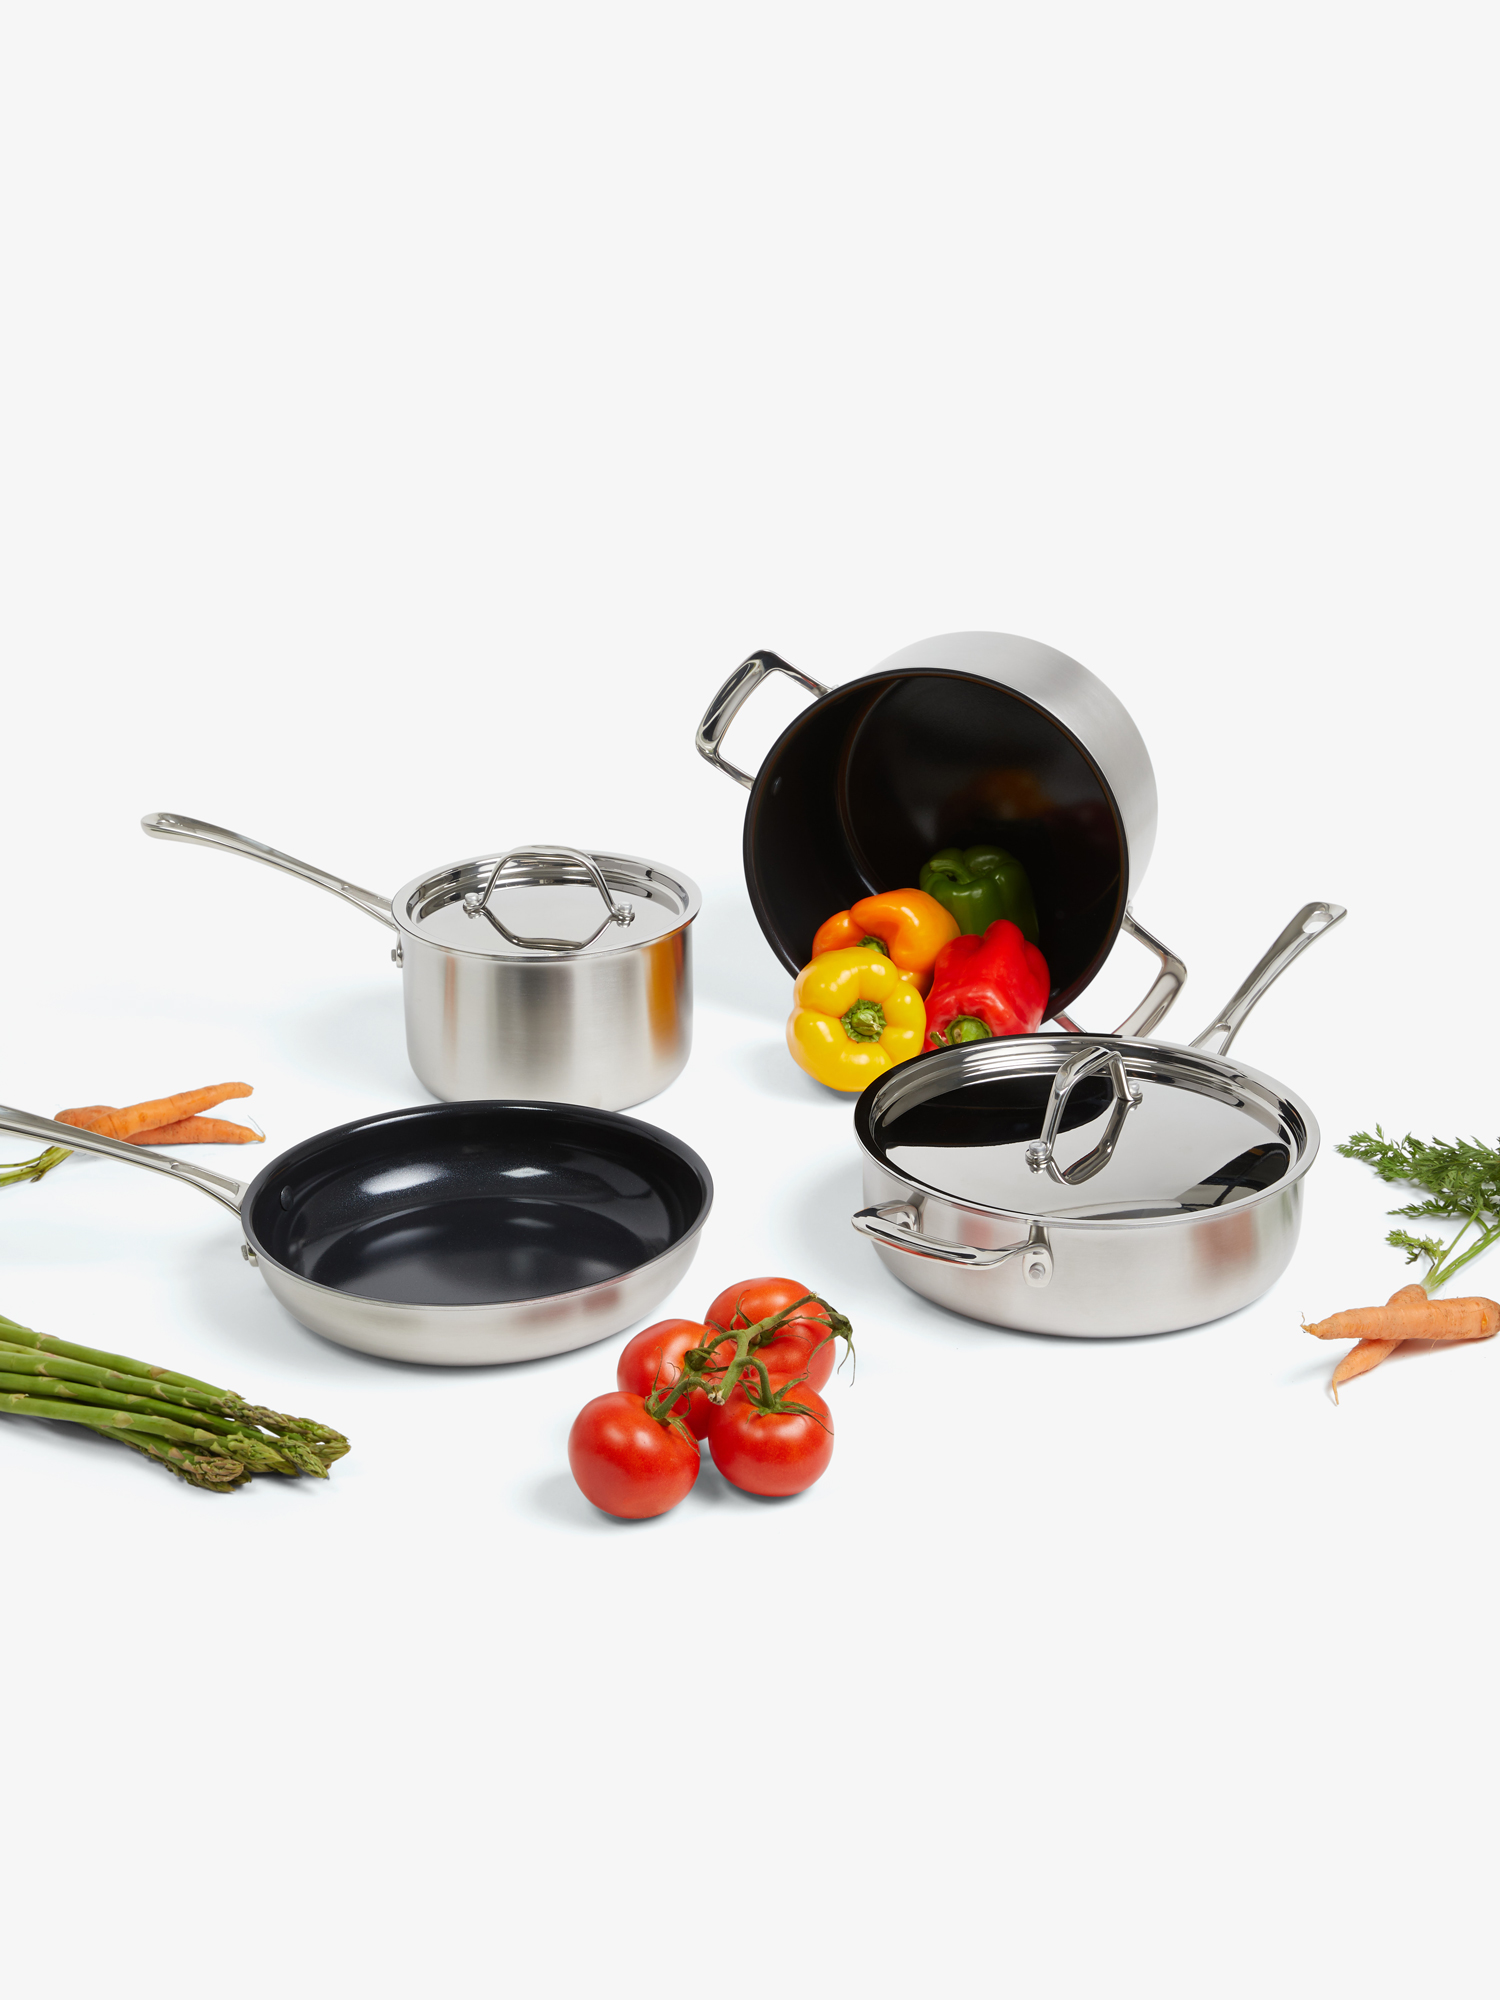 New Direct-to-Consumer Kitchenware Companies Are Popping Up